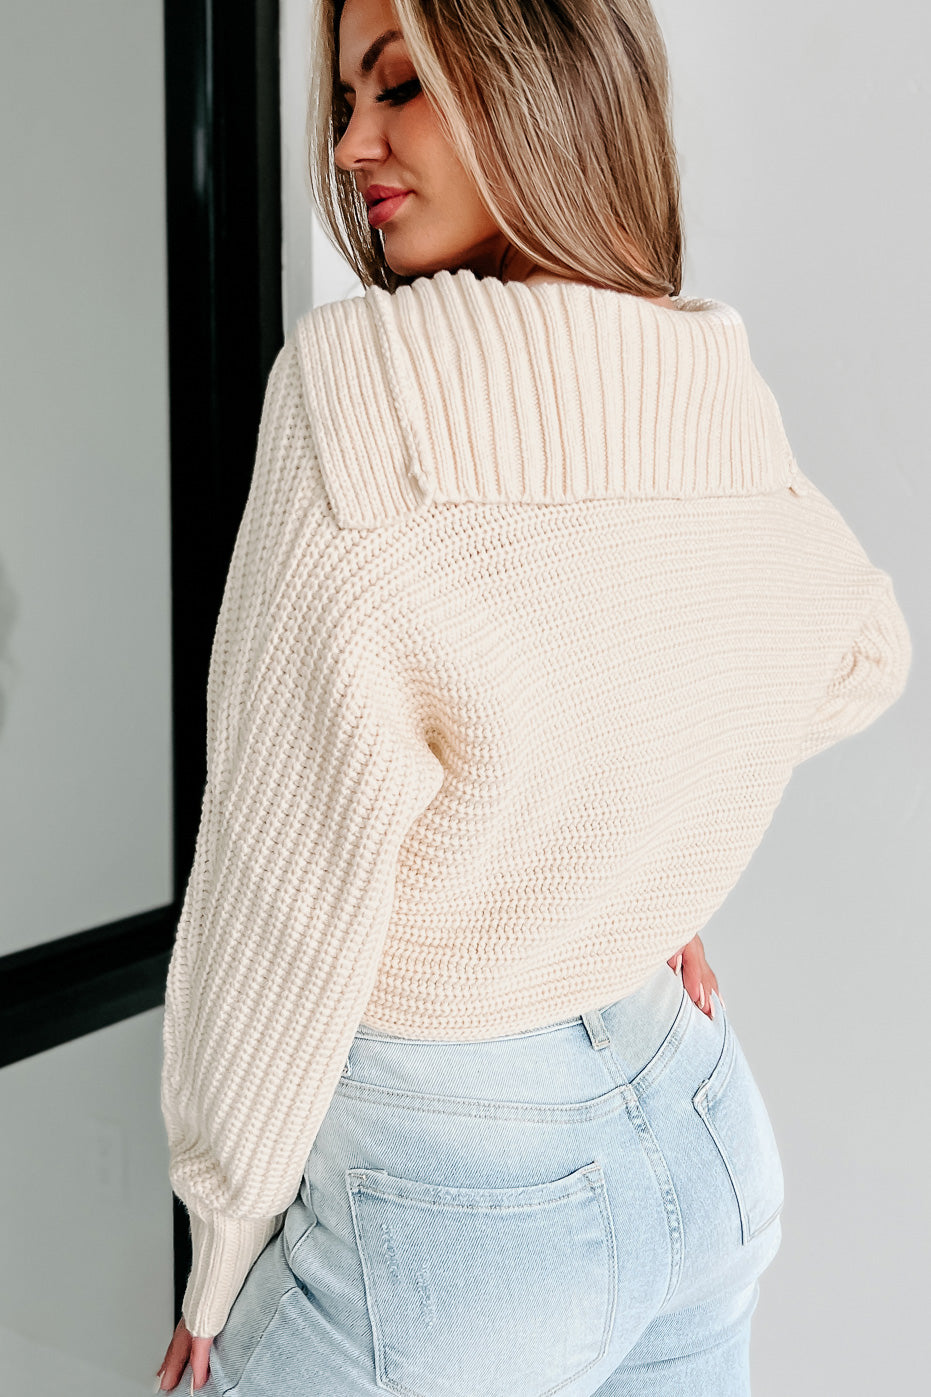 Can't Talk Right Now Collared Crop Sweater (Cream) - NanaMacs